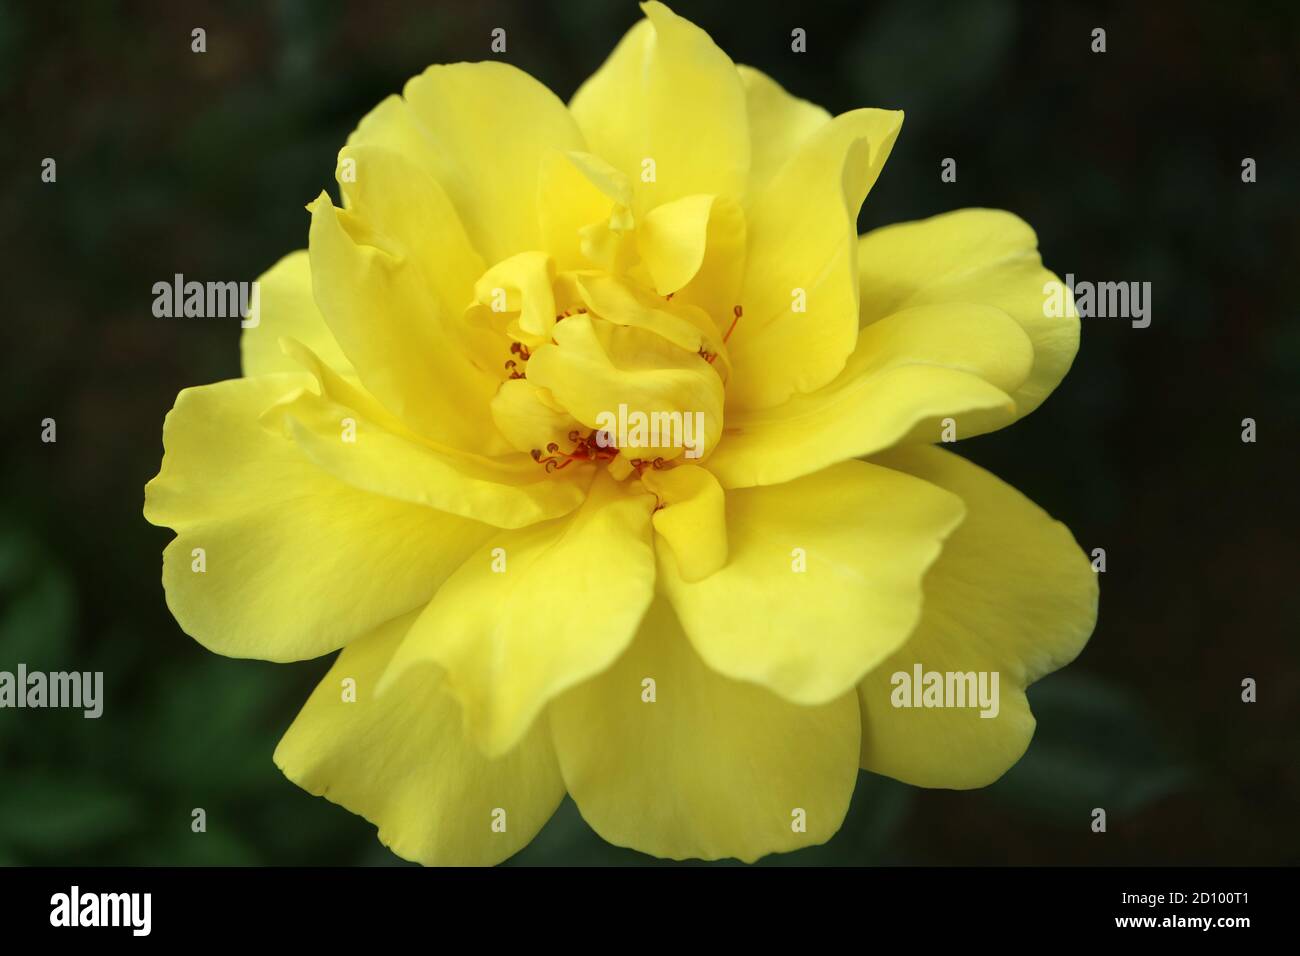 Yellow Rose with delicate petals and green leaves, yellow rose in the garden, spring flower, beauty in nature, yellow rose macro, stock image Stock Photo